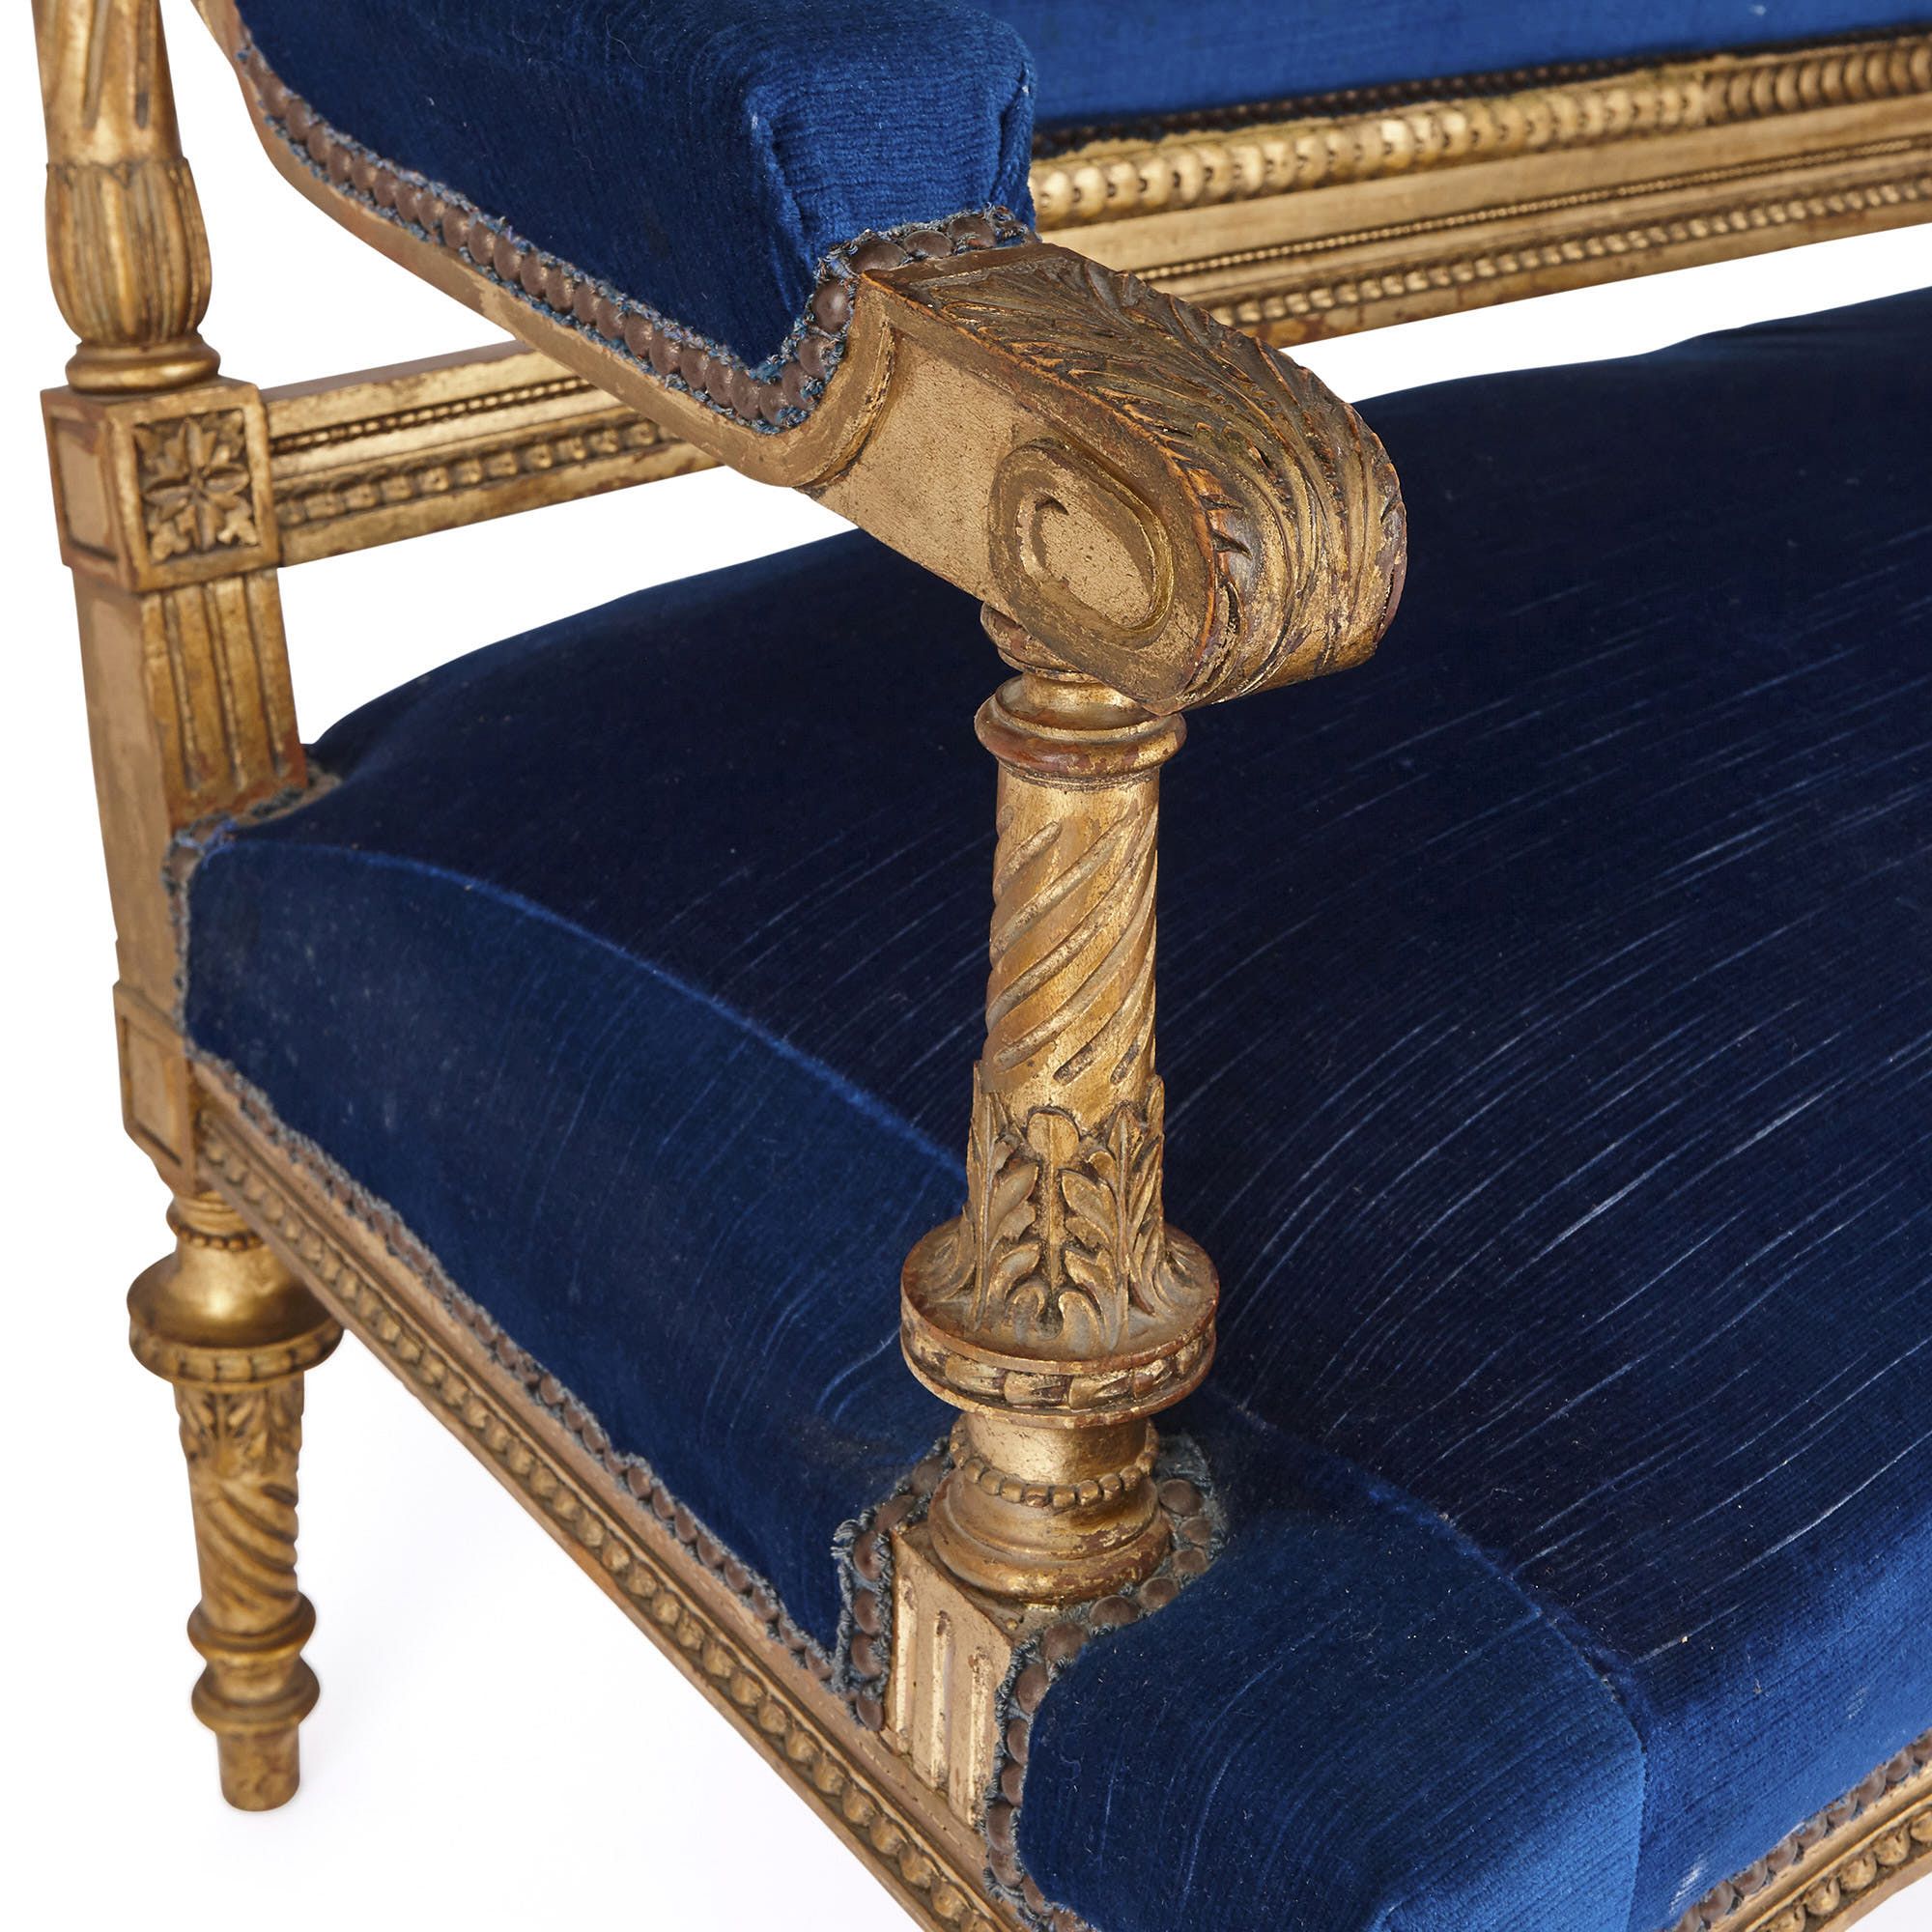 Louis XVI style blue upholstered giltwood furniture suite